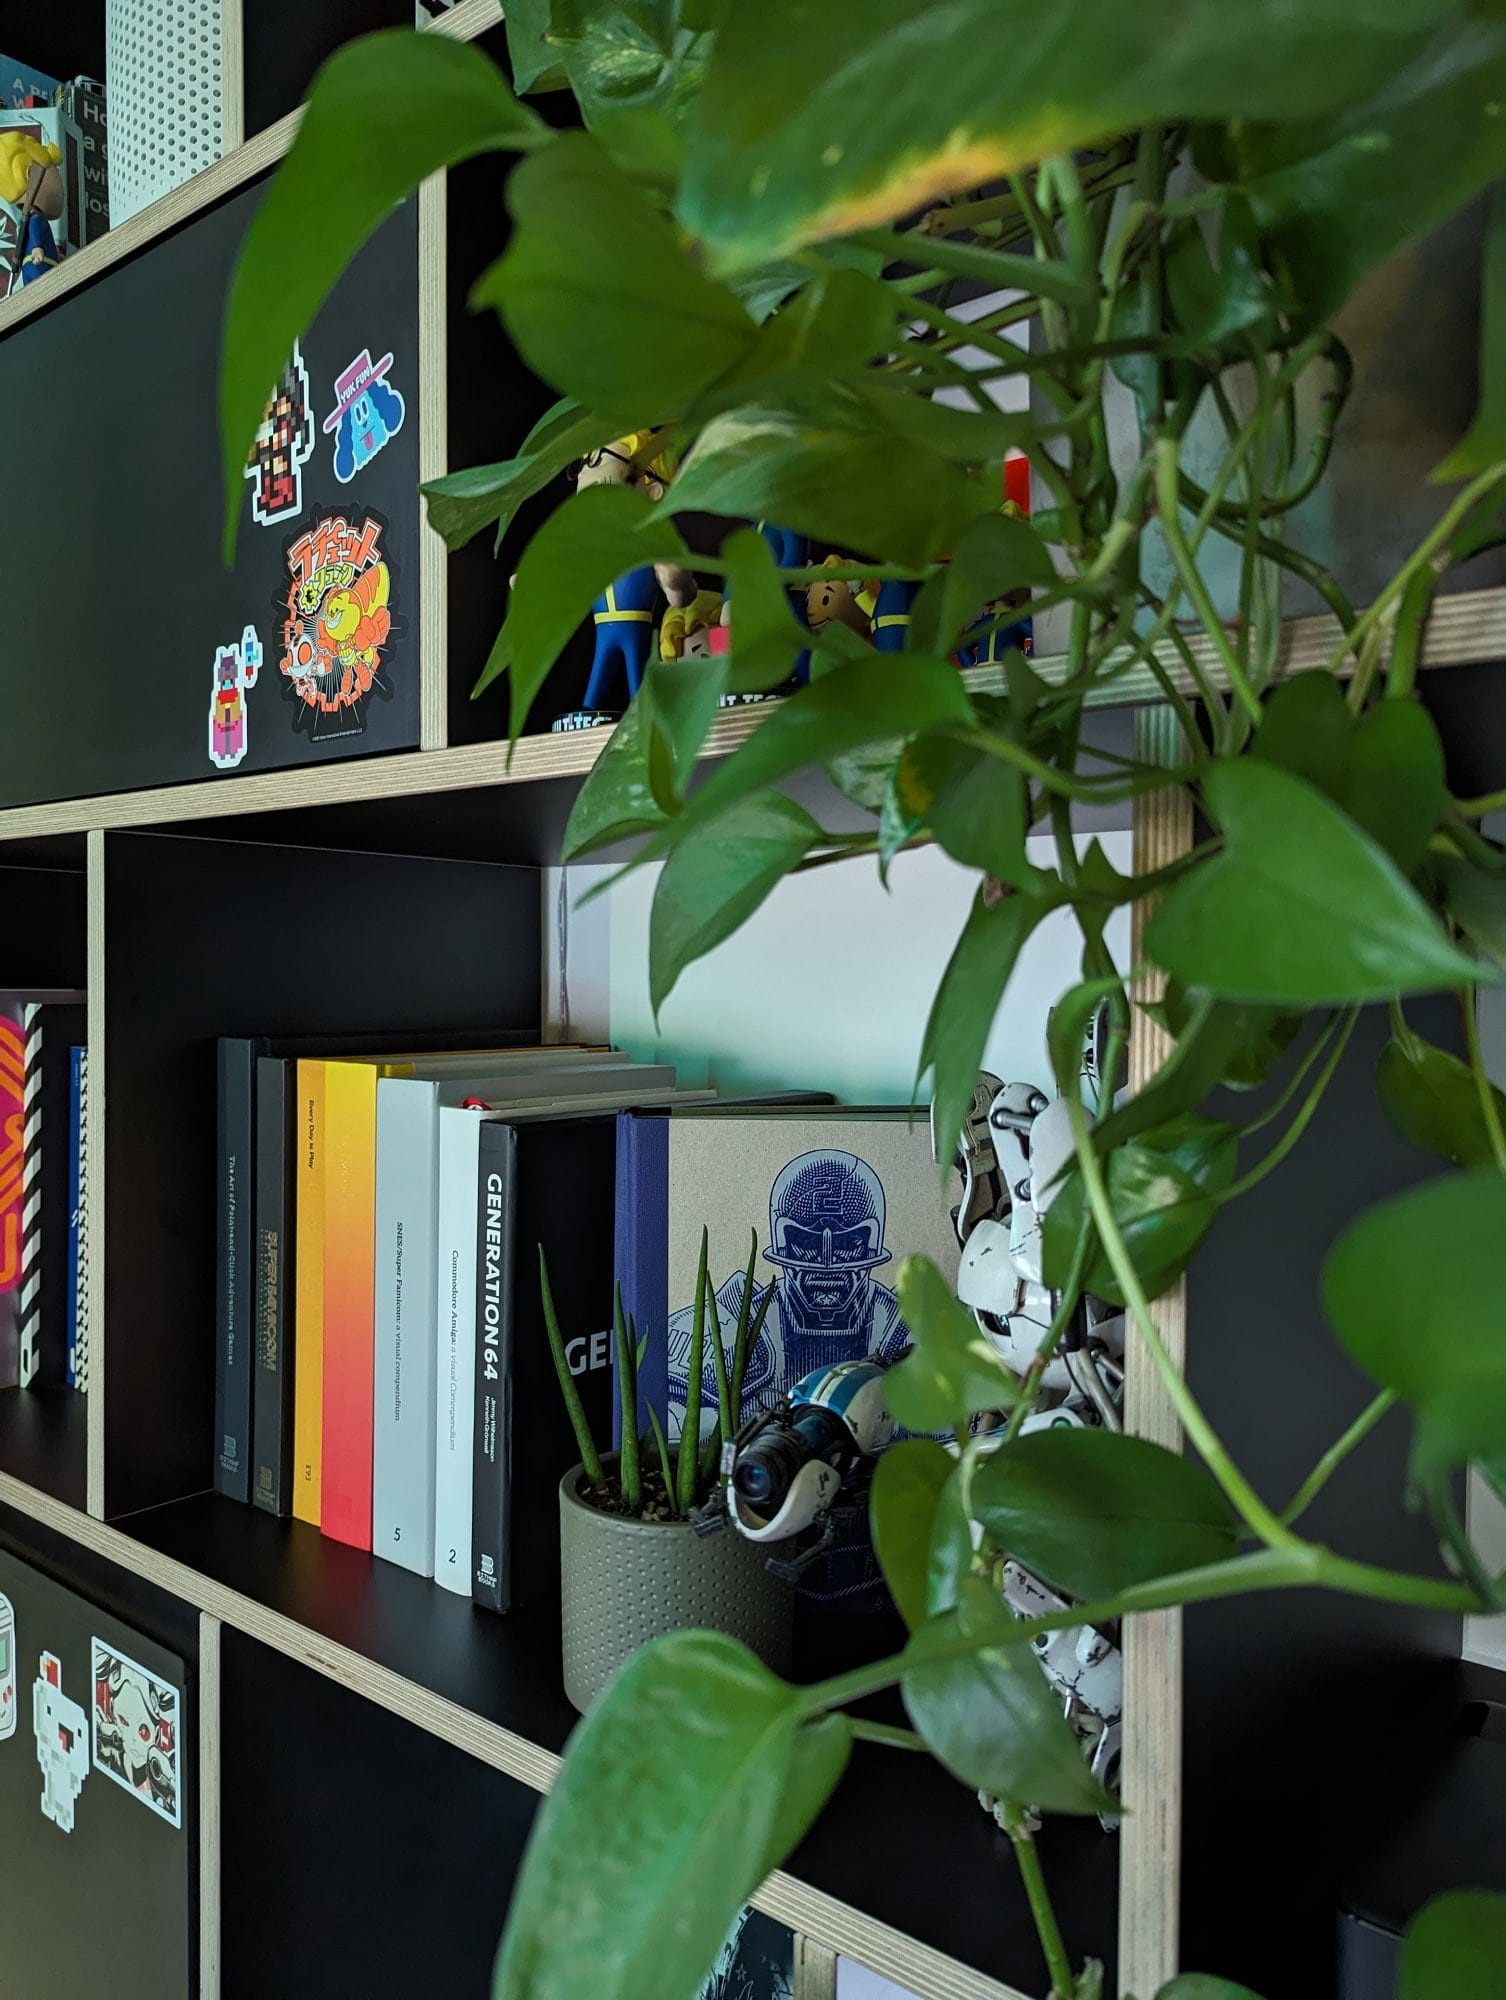 A bookshelf adorned with books, action figures, and decorative stickers, partially obscured by vibrant green foliage from a nearby plant